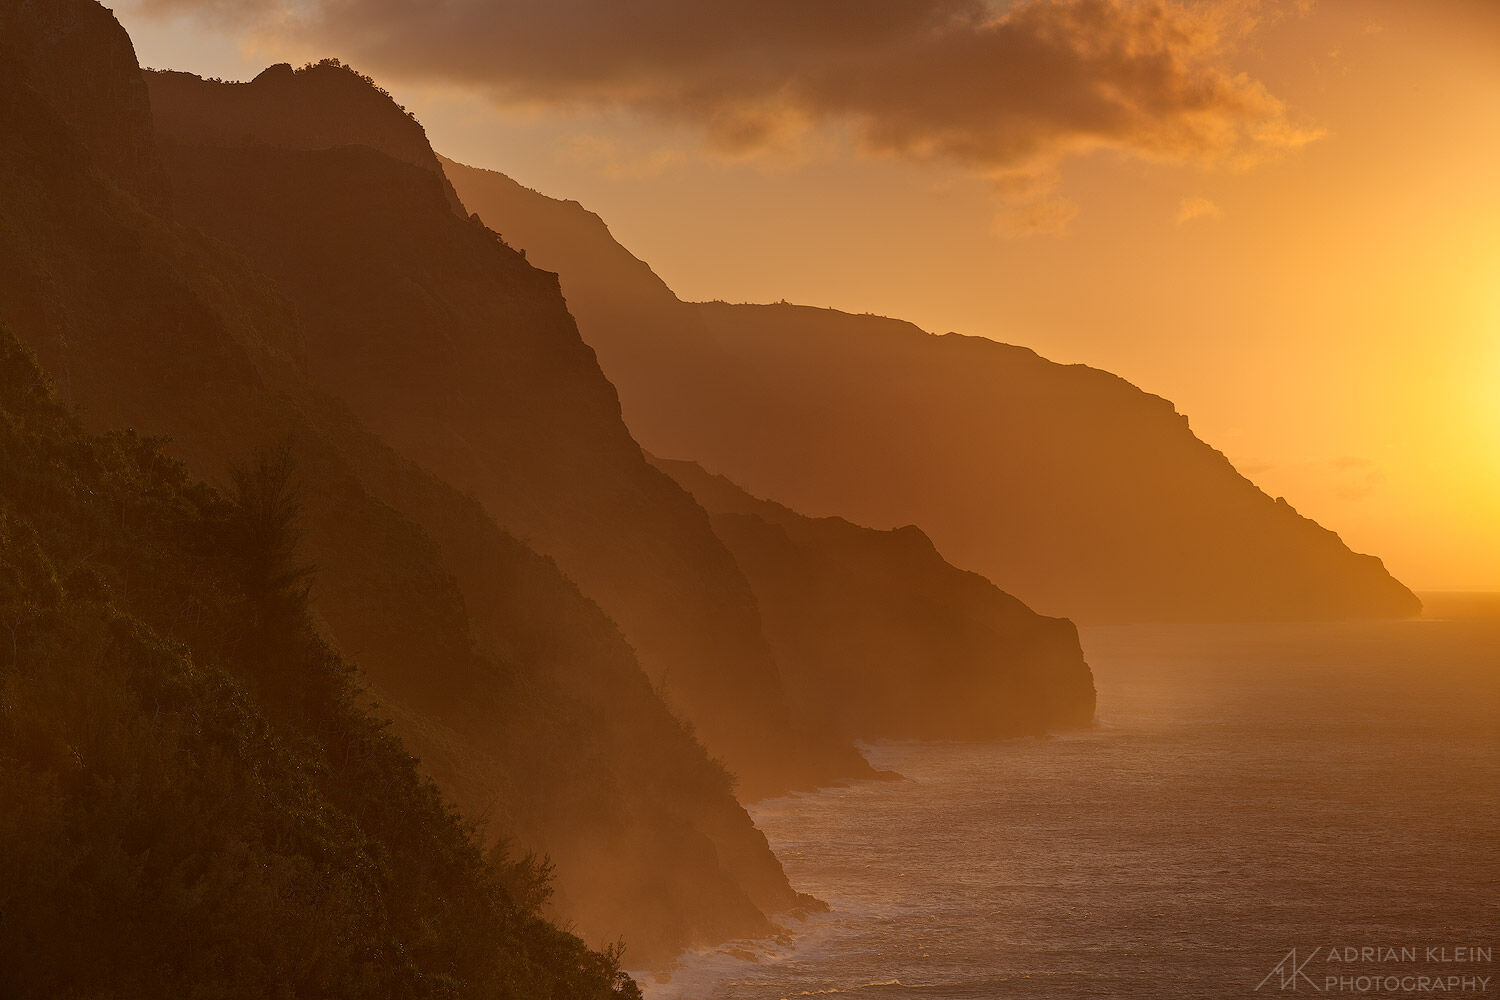 The sun glows intensely through the ocean air and clouds along the rugged Napali Coast of Kauai, Hawaii. Limited Edition of 100...